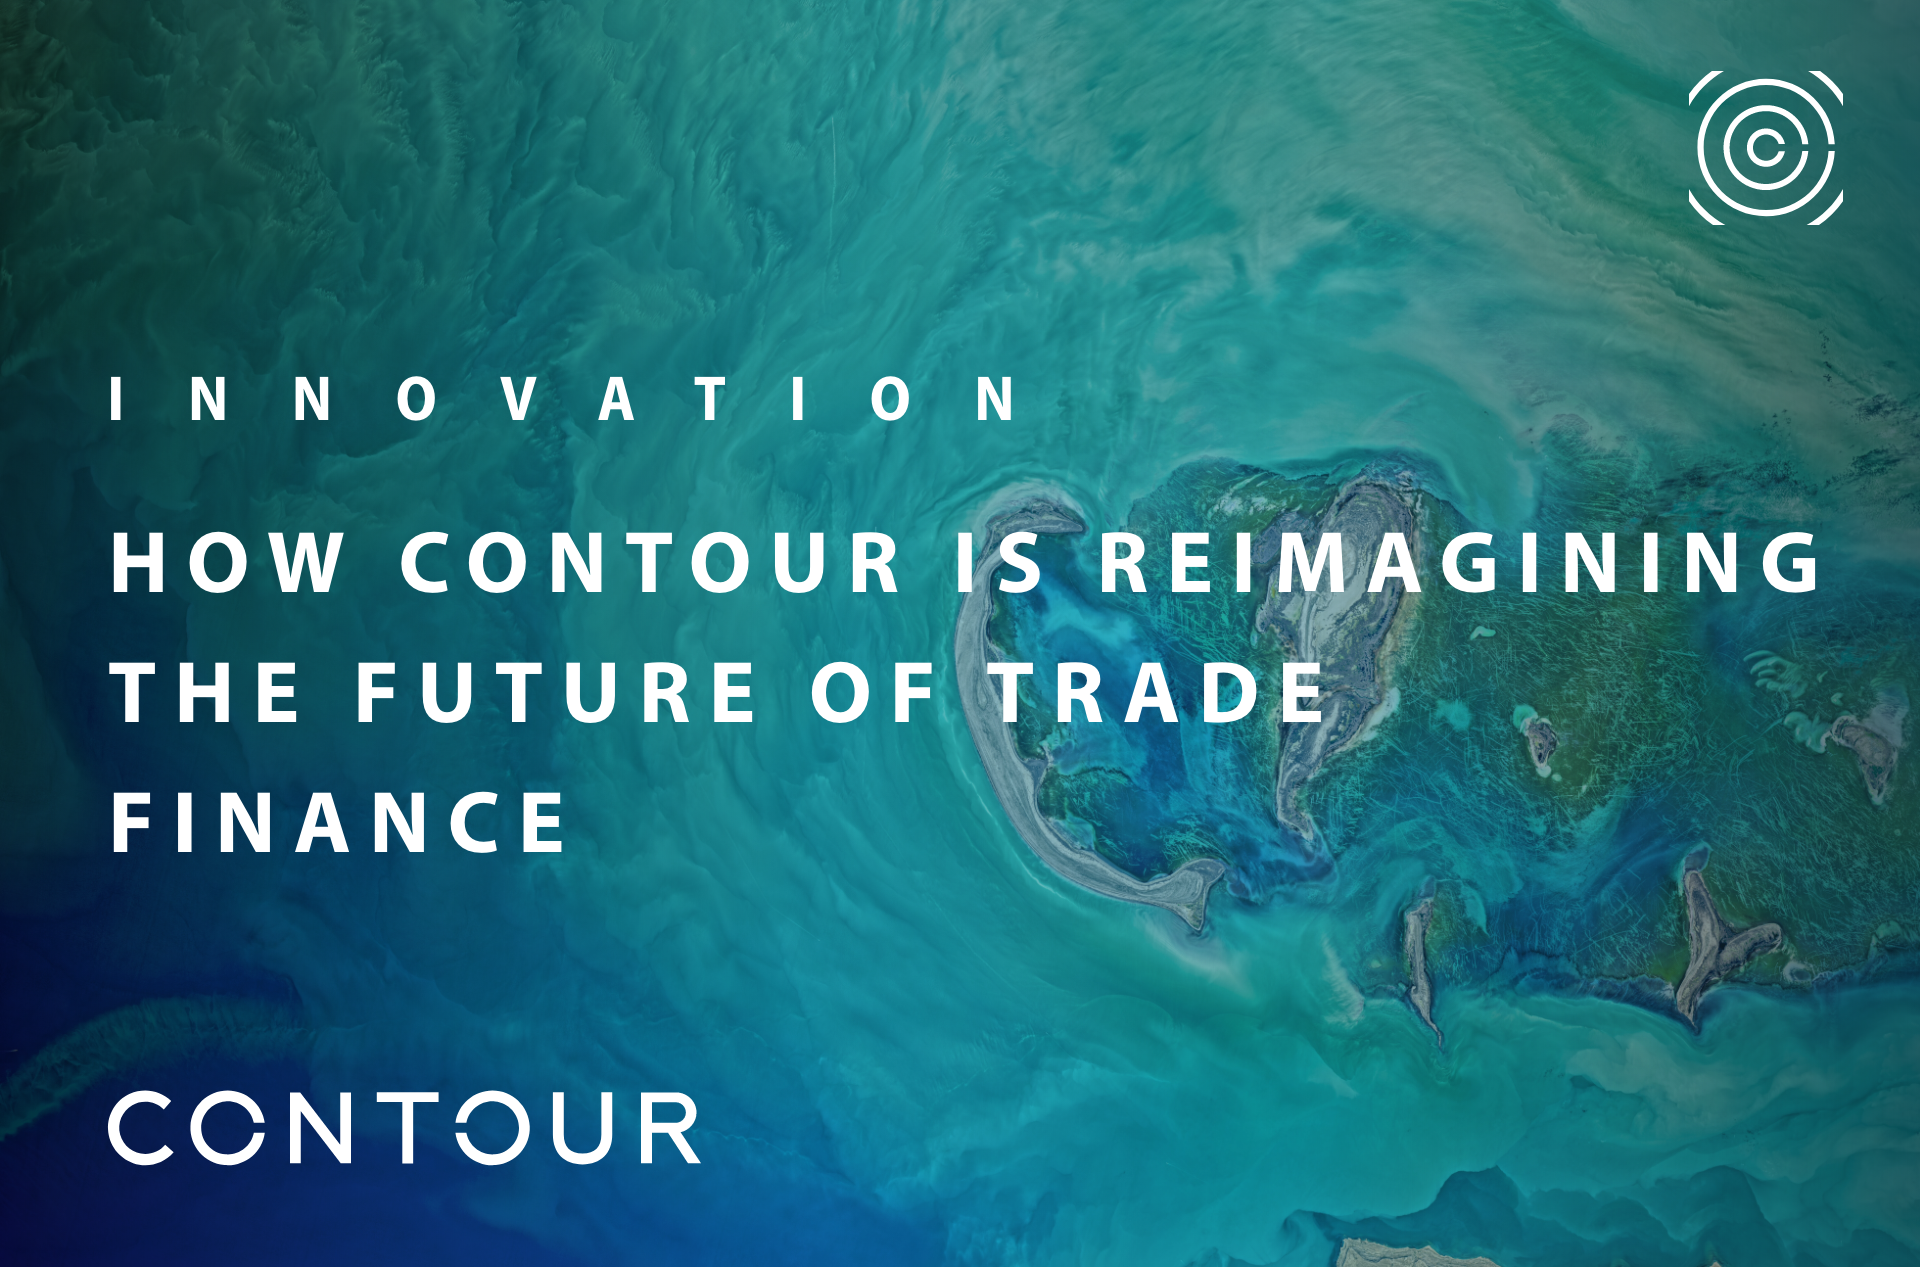 How Contour is reimagining the future of trade finance